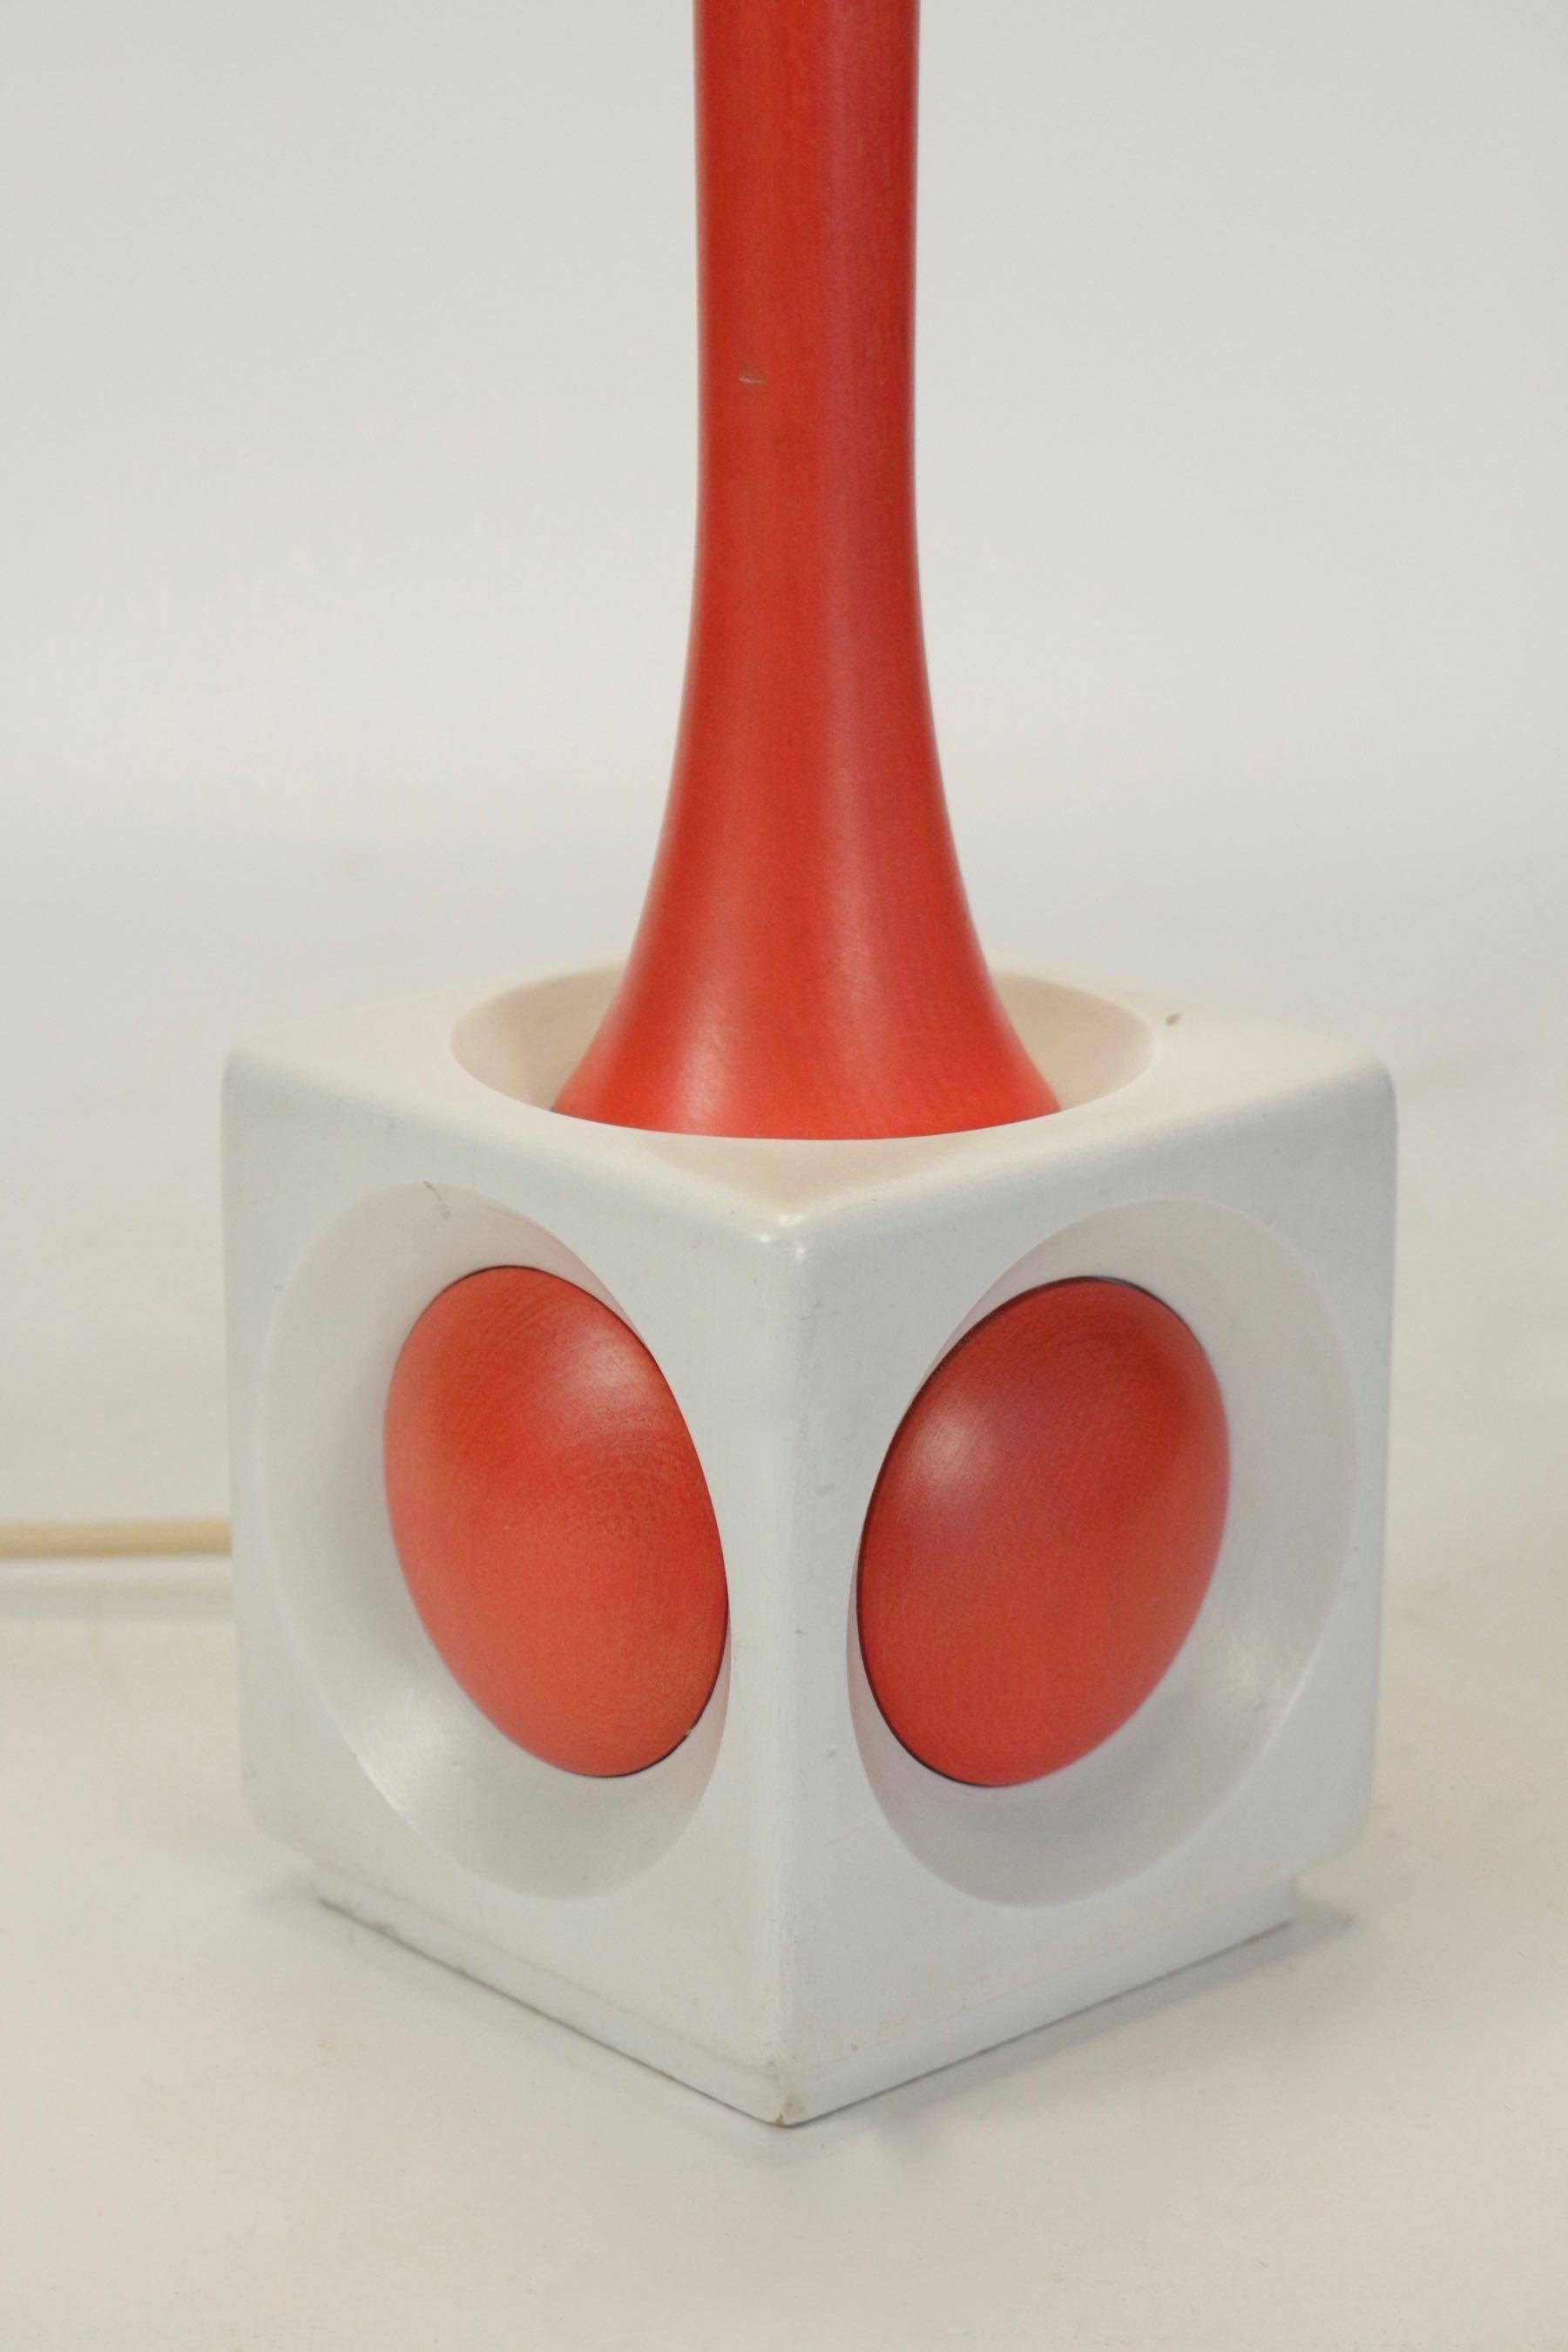 A lamp of wood painted orange and white, circa 1960, midcentury design.
  